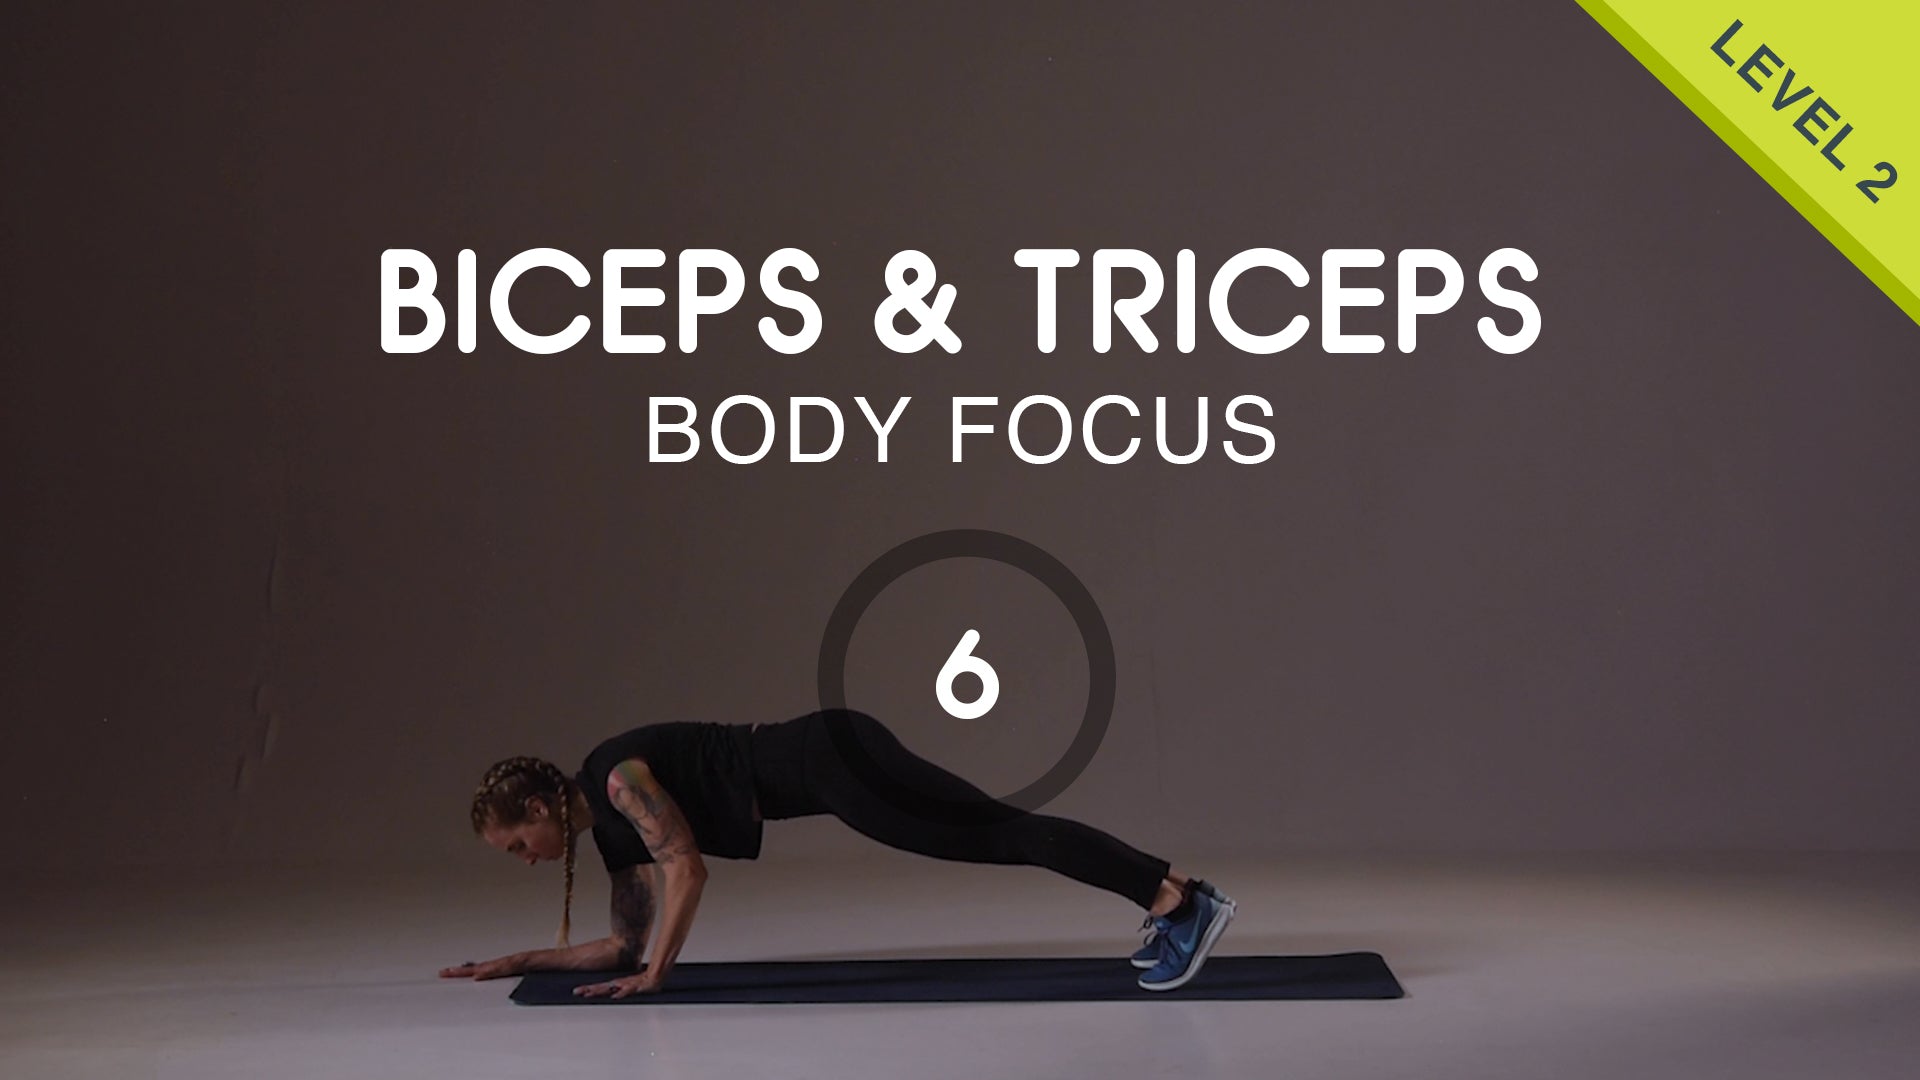 10 min HIIT Workout for Triceps, Core and Shoulders - Level 2